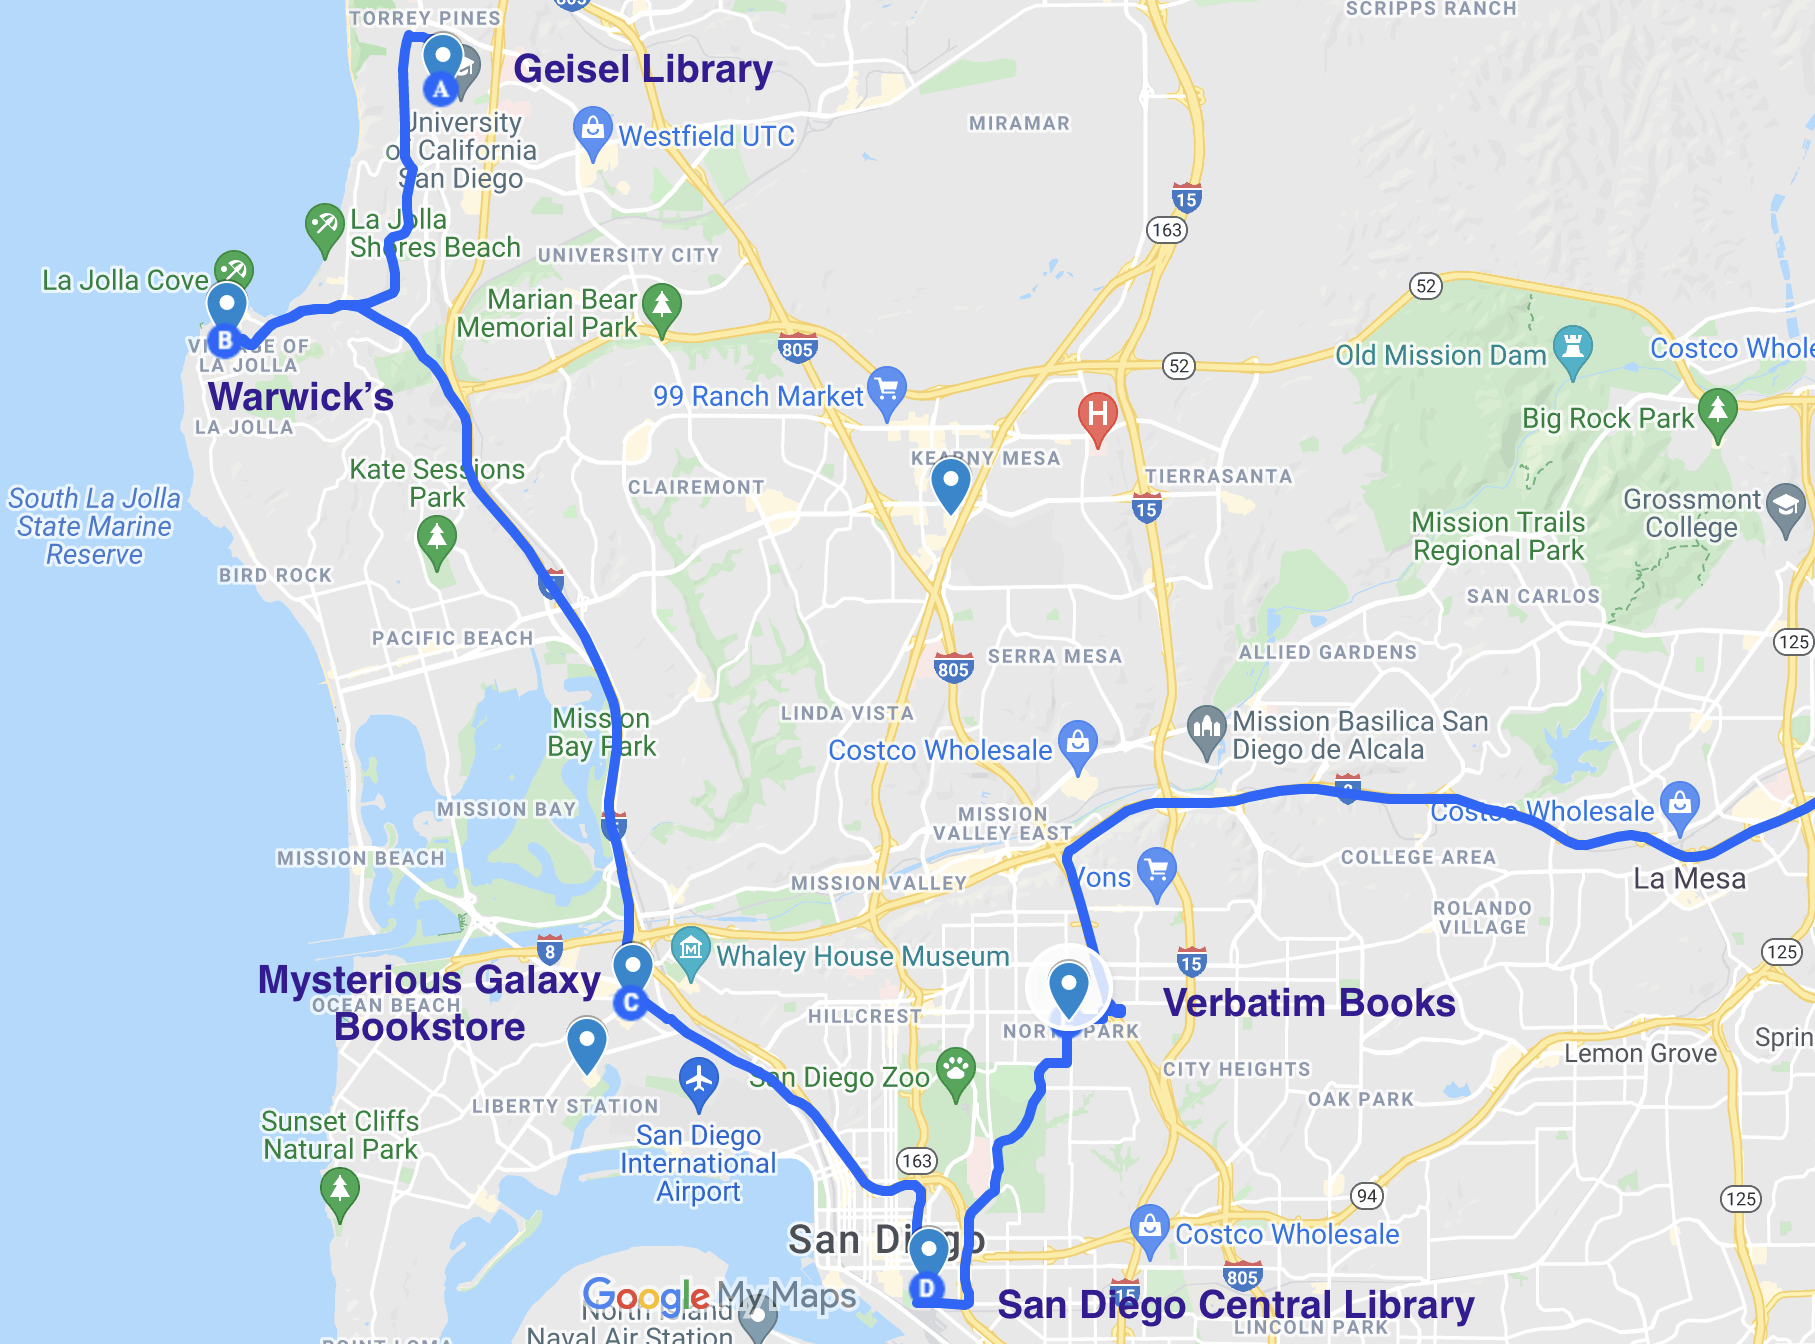 map of literary spots in san diego california 